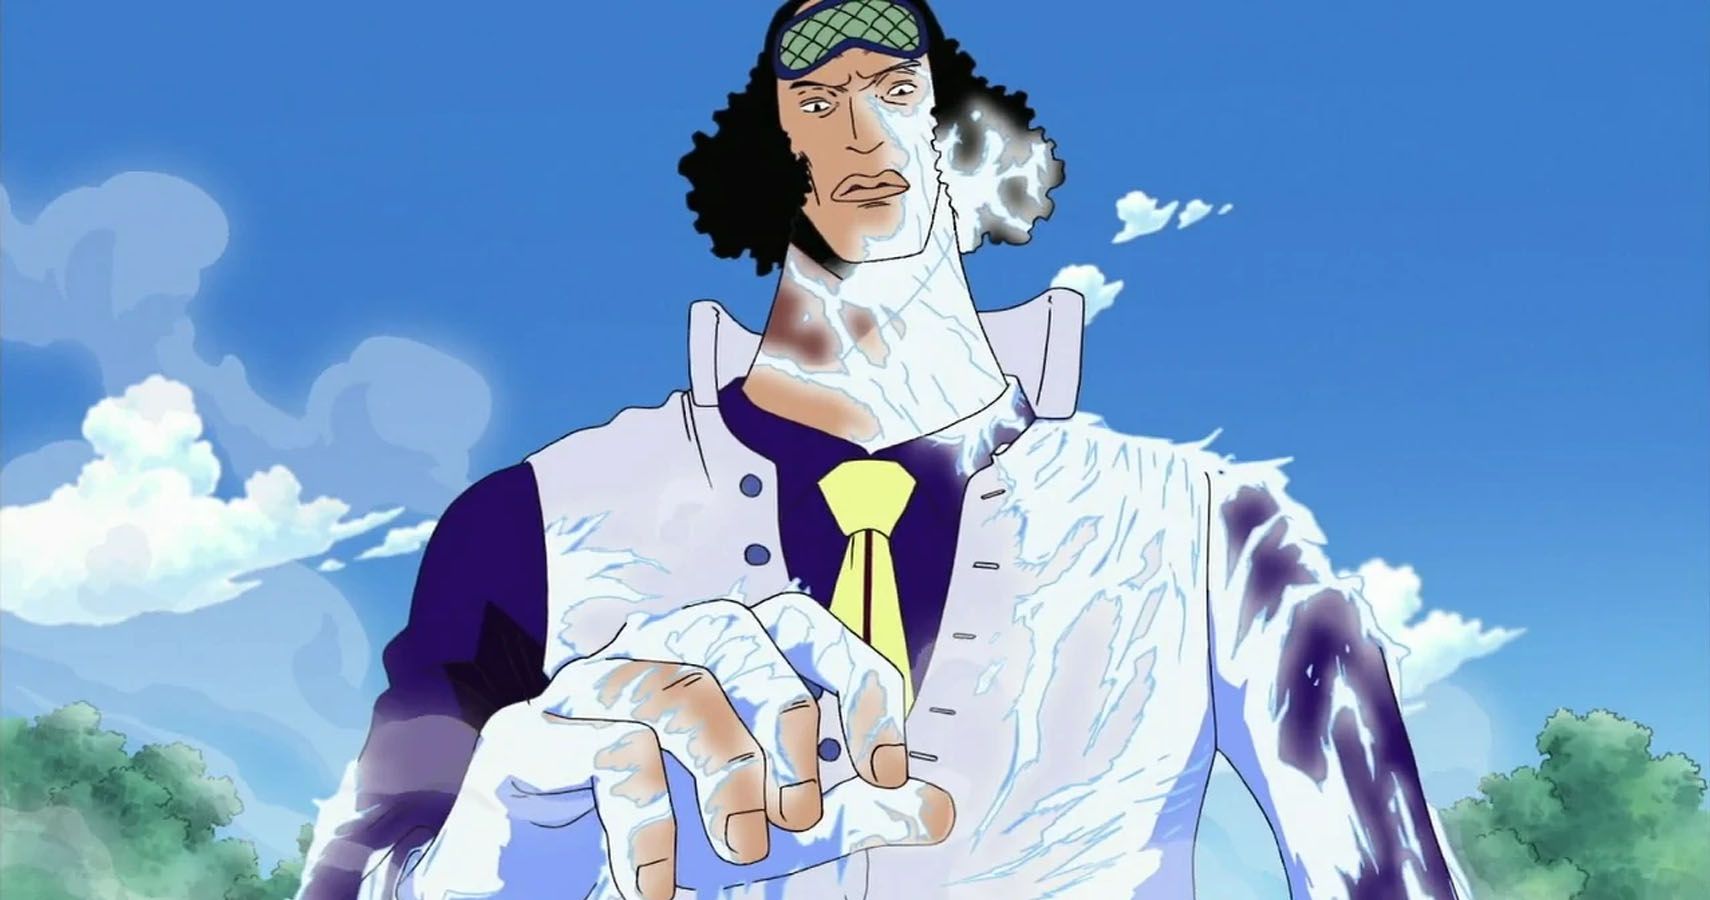 Admiral Aokiji Covers His Body In Ice Using His Devil Fruit Powers in One Piece